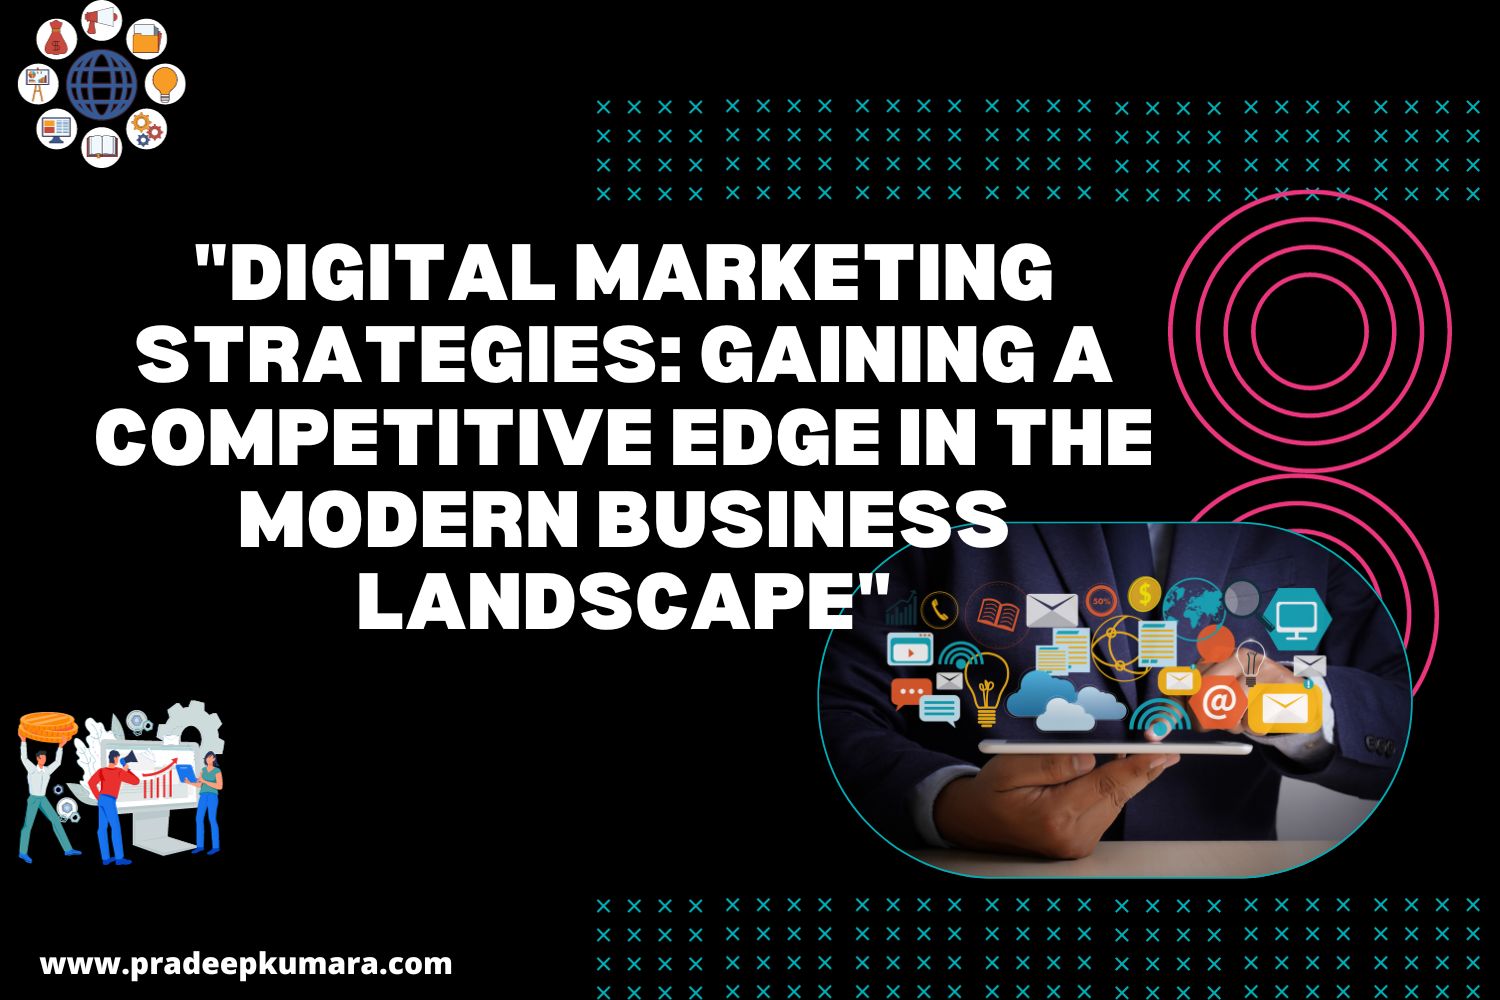 Digital Marketing Strategies: Gaining a Competitive Edge in the Modern Business Landscape